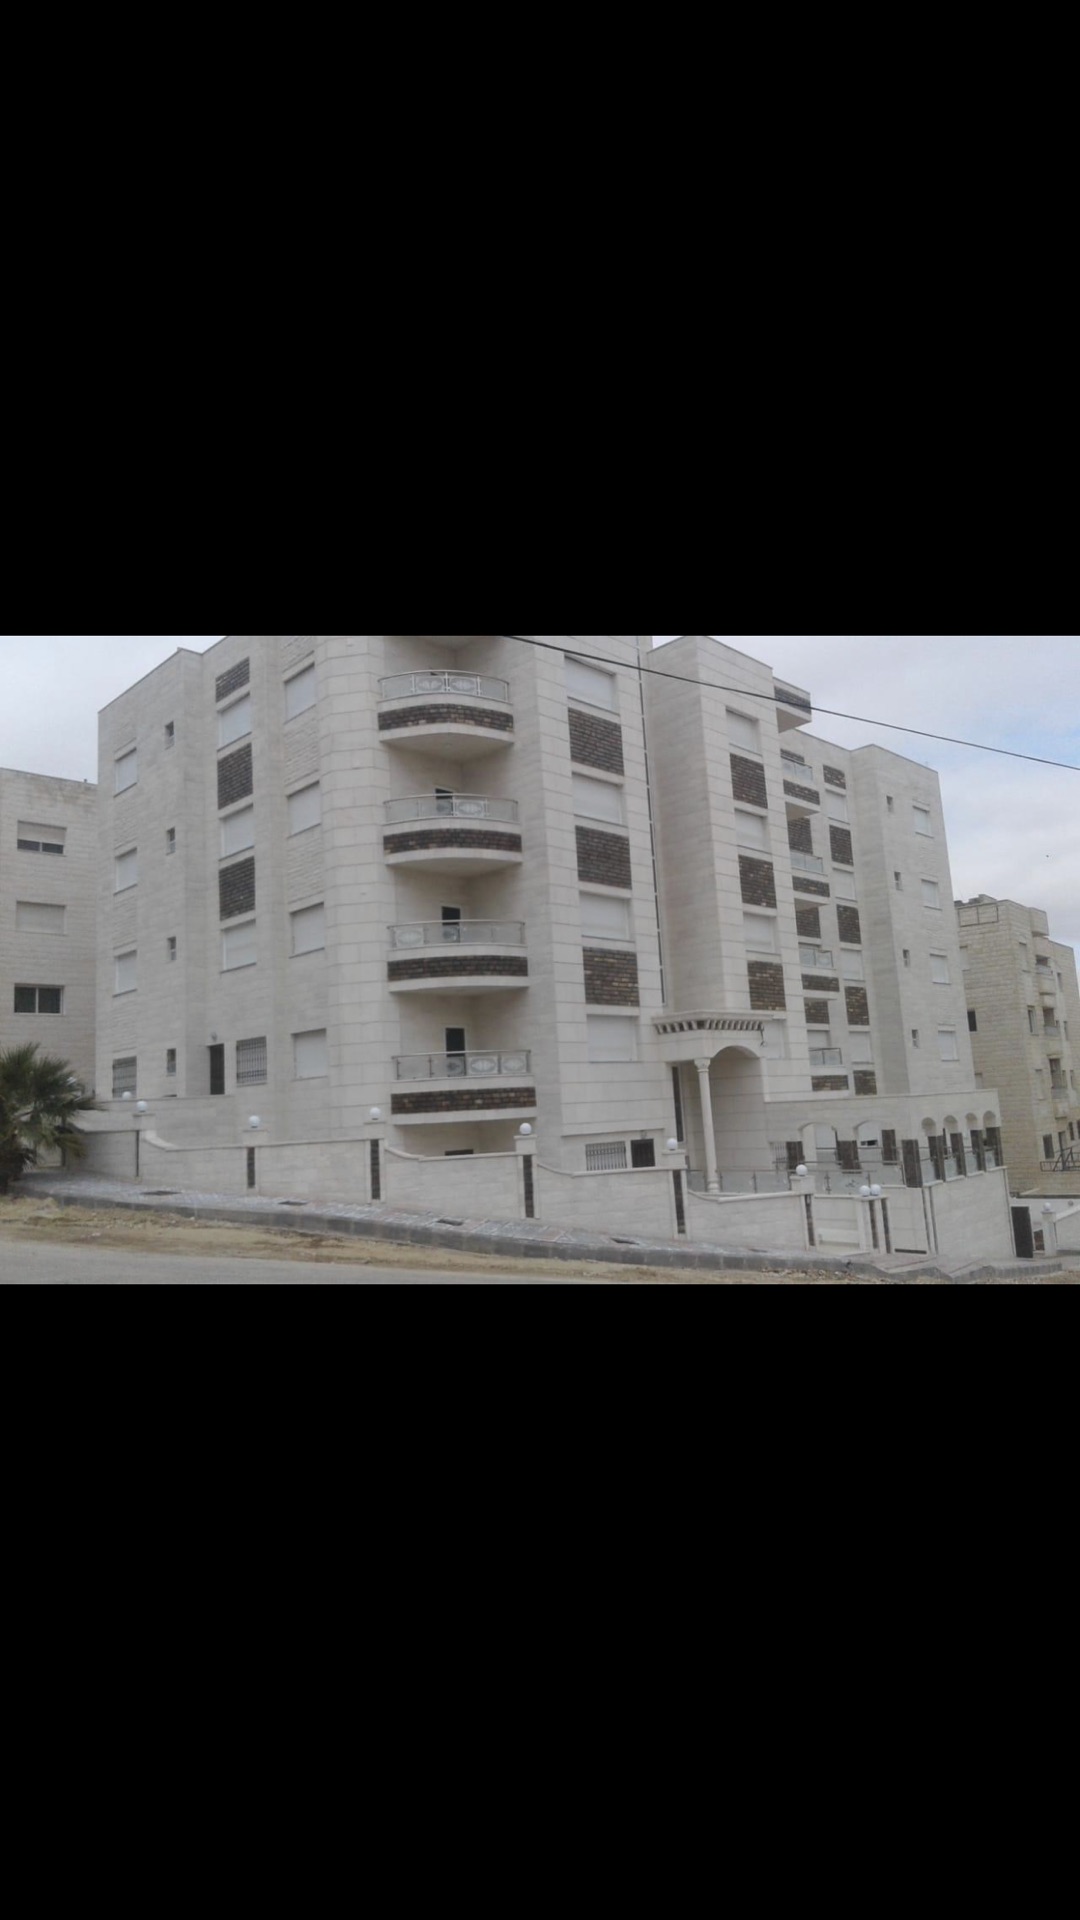 UNIQUE OPPORTUNITY TO RENT A 1BR GARDEN HOUSE ON OLD TOWN, DOWN TOWN!!!-  شقق فارغة فخمة جدا...